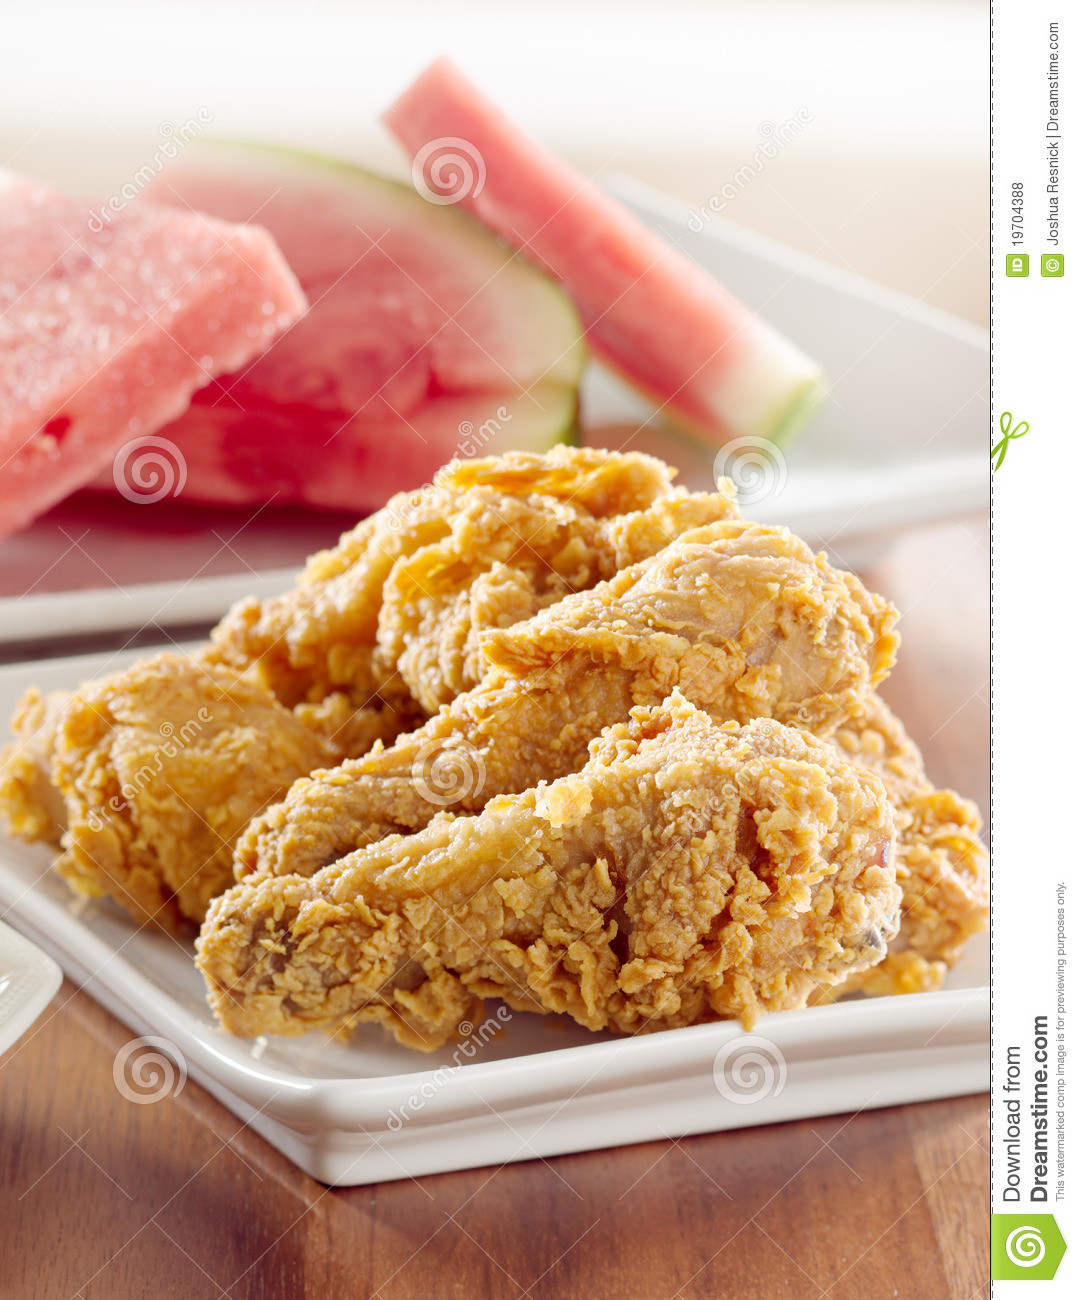 Fried Chicken And Watermelon
 Fried Chicken And Watermelon Royalty Free Stock s